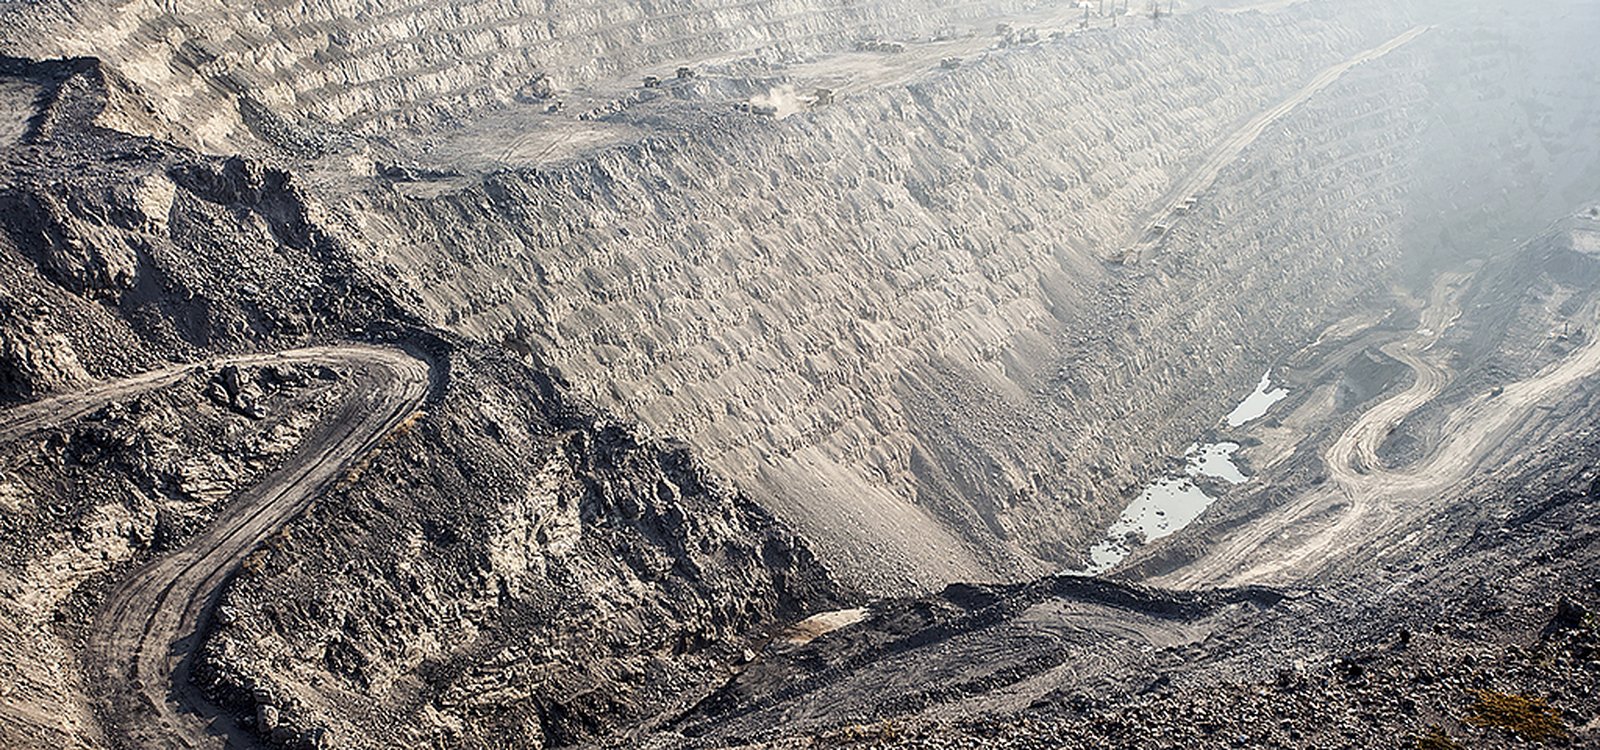 Before, Rampura Agucha was solely an open pit mine. Now it is complemented by an underground operation.